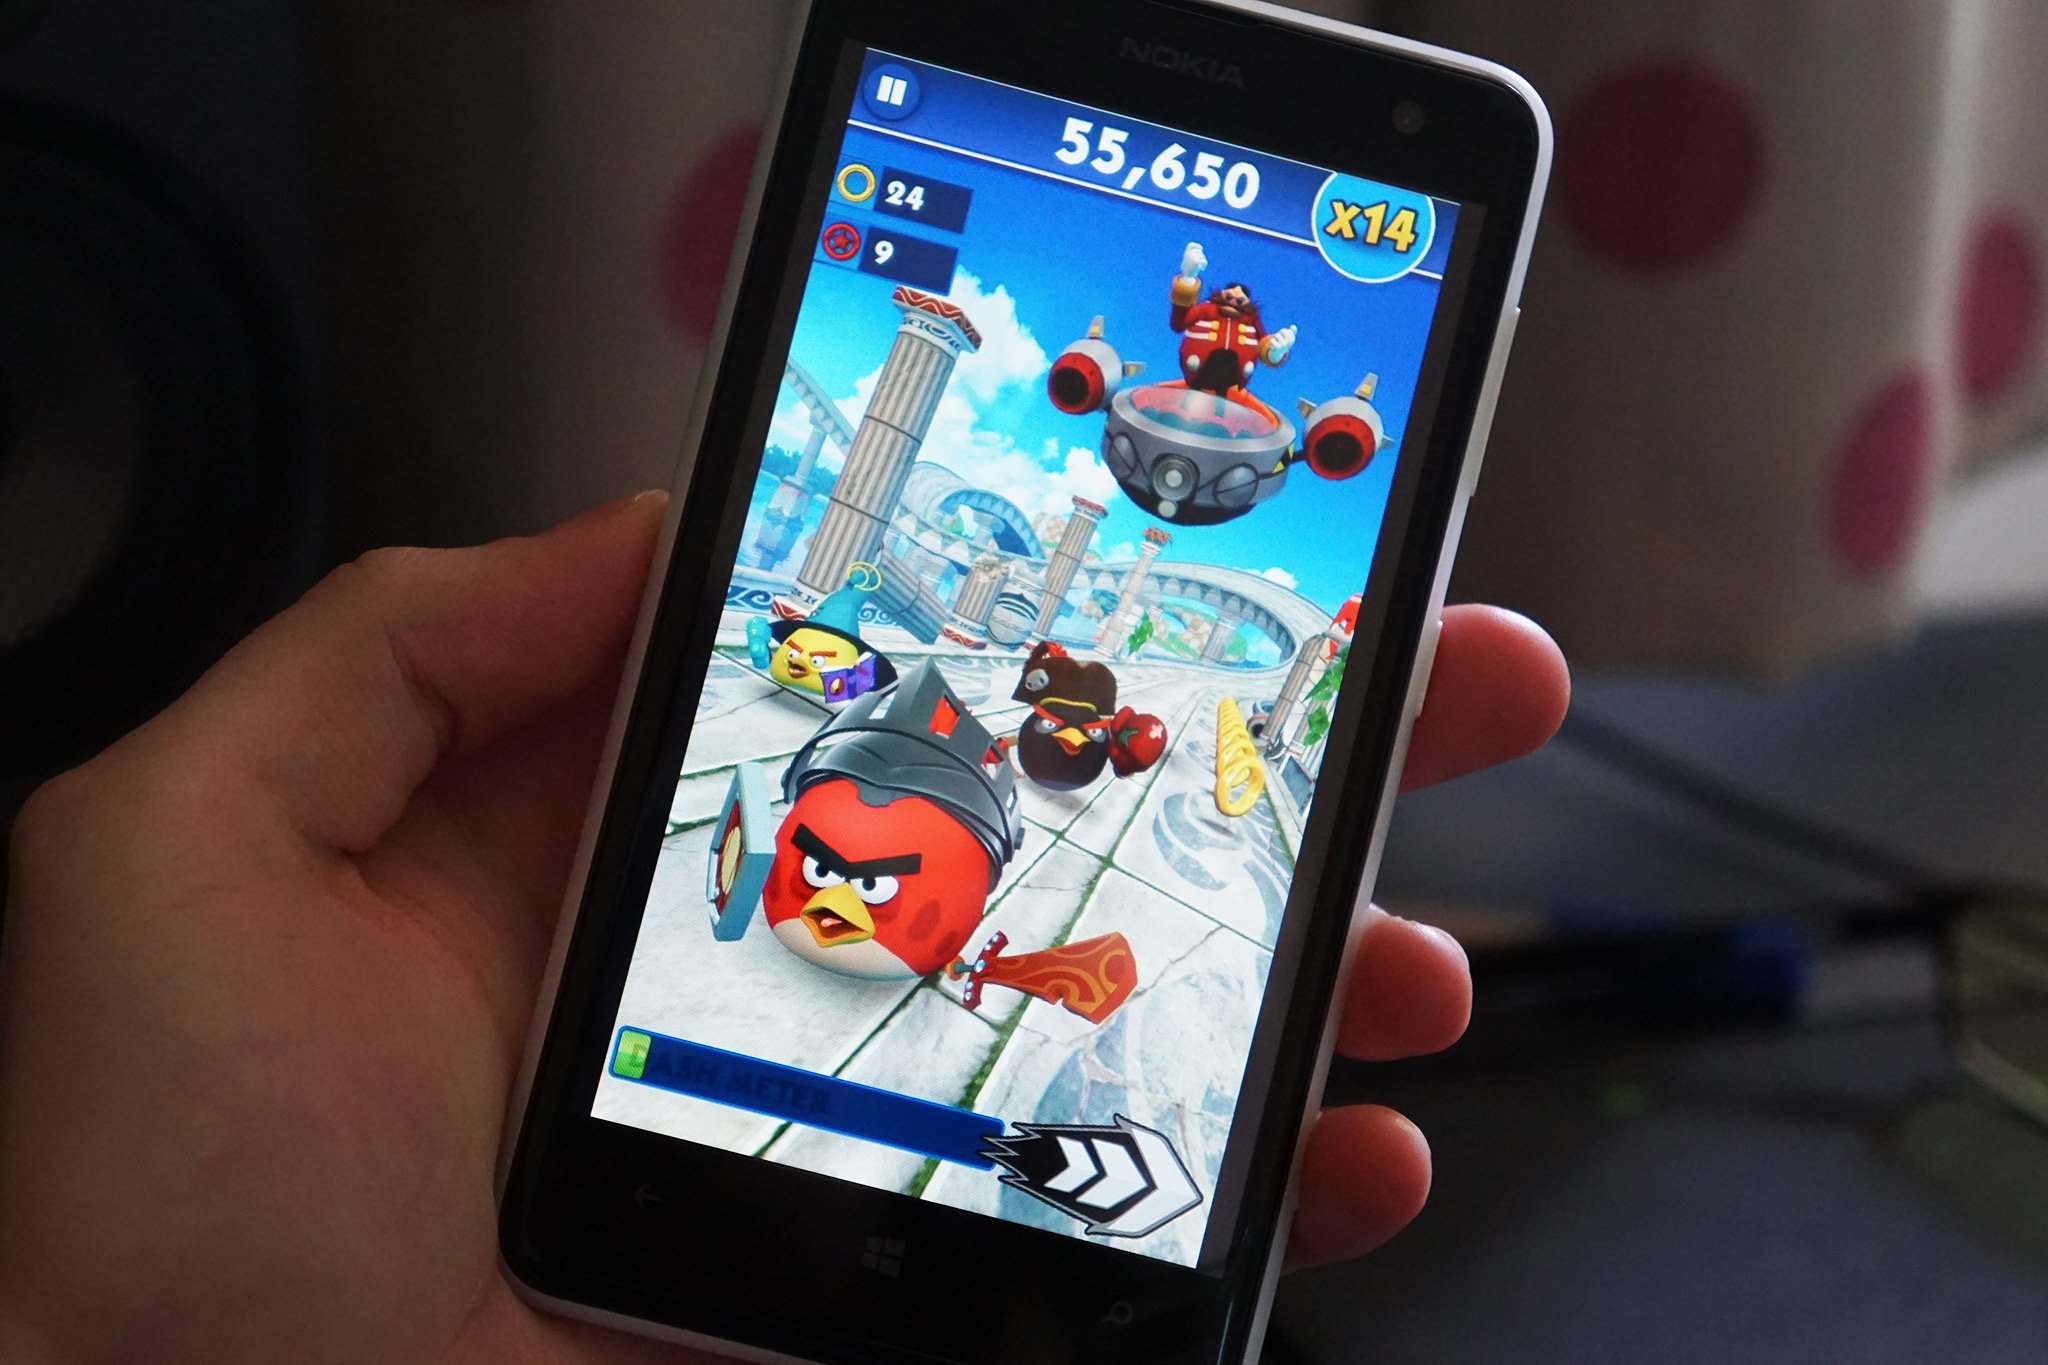 Angry Birds Epic, Software